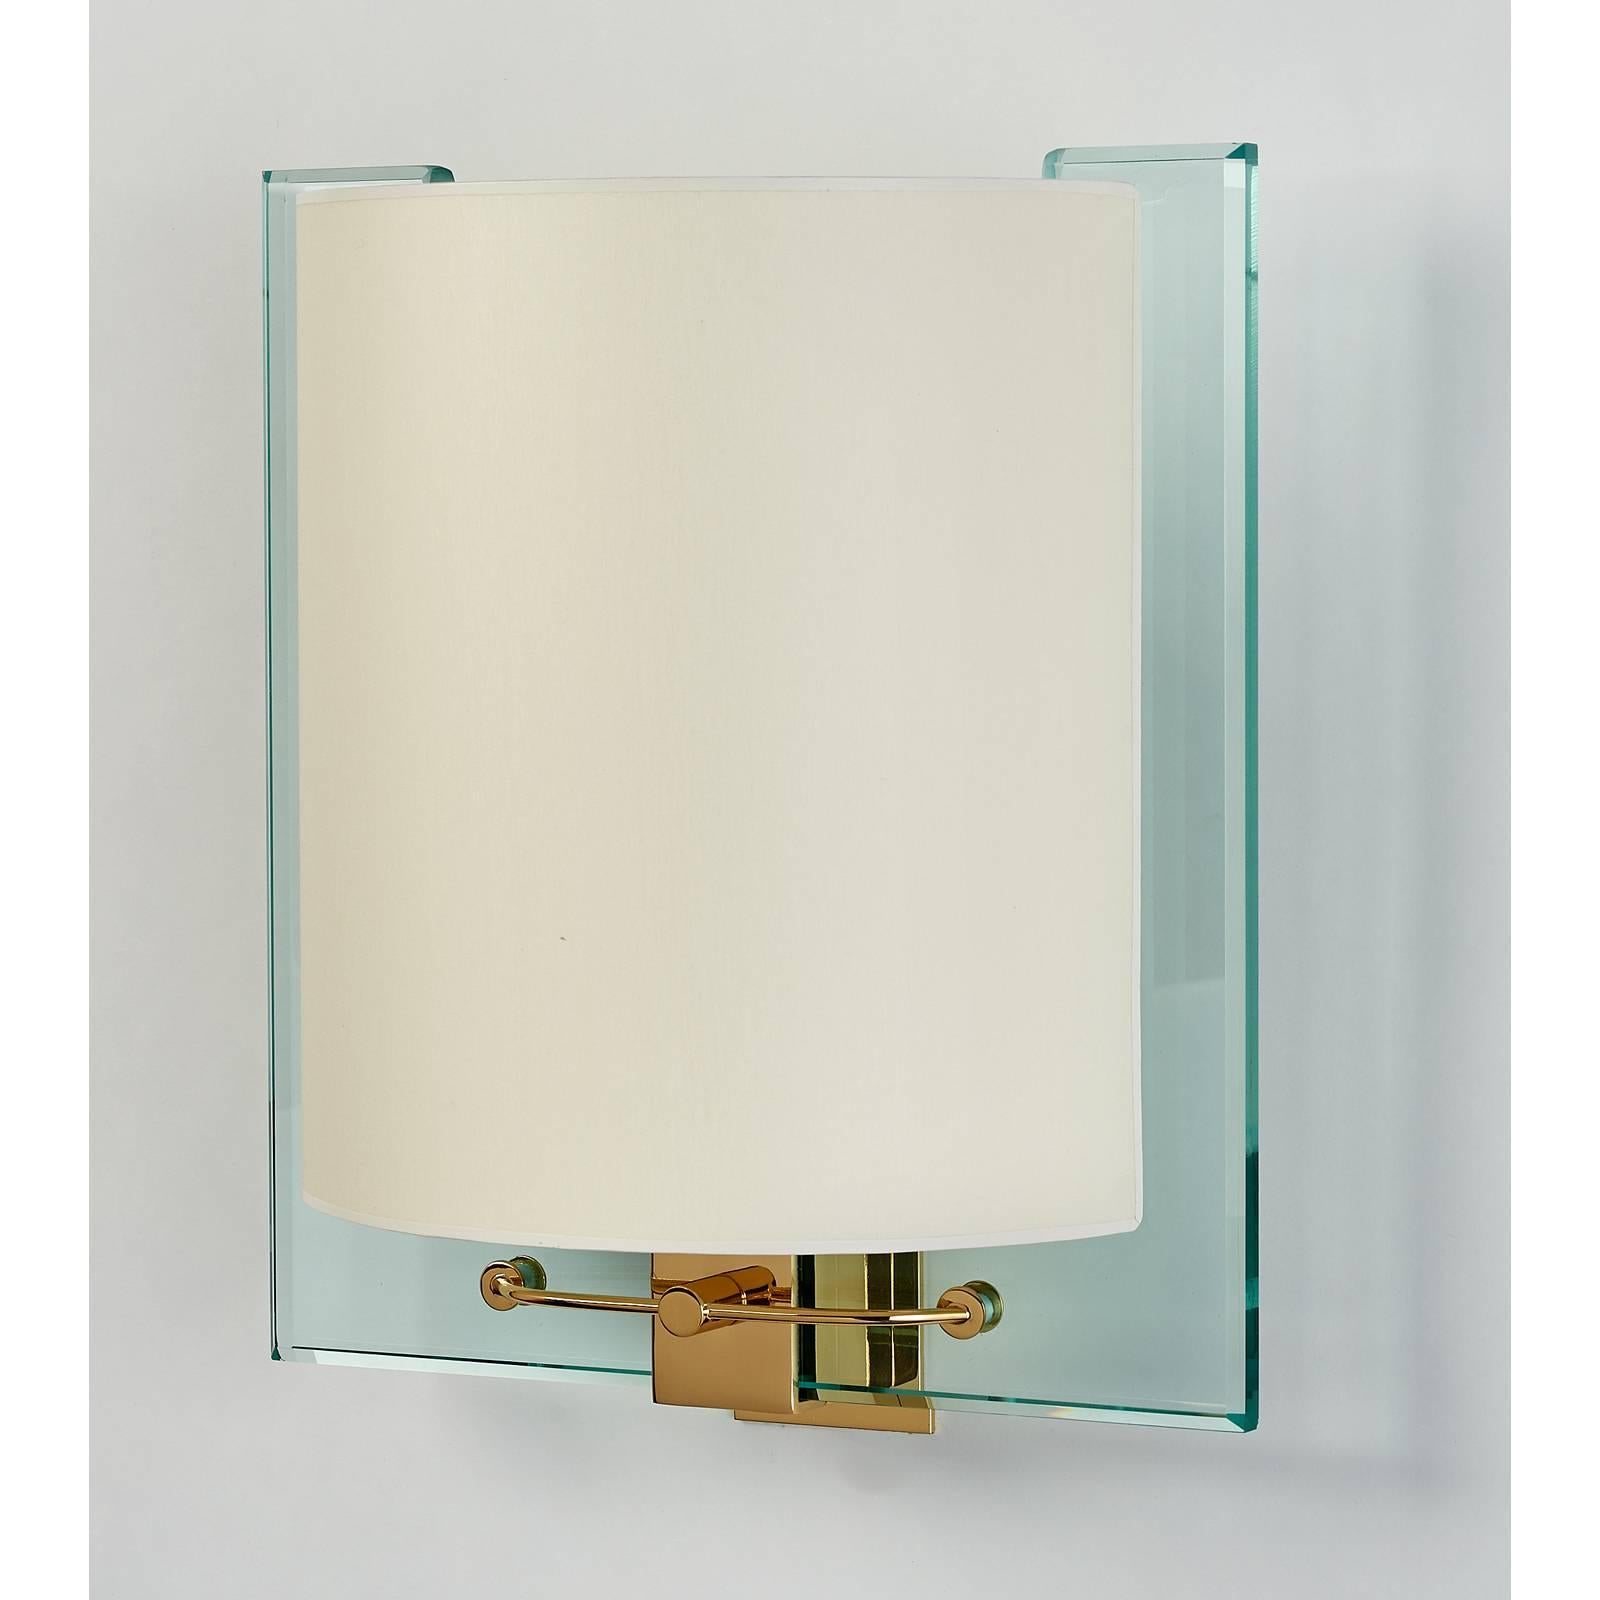 Nathalie Grenon for Fontana Arte.

A stunning pair of Fontana Arte glass and polished brass sconces, designed by Nathalie Grenon for Bulgari in 1990.
Rewired for use in the USA.
Measures: 13.5 W x 15 H x 7 proj.